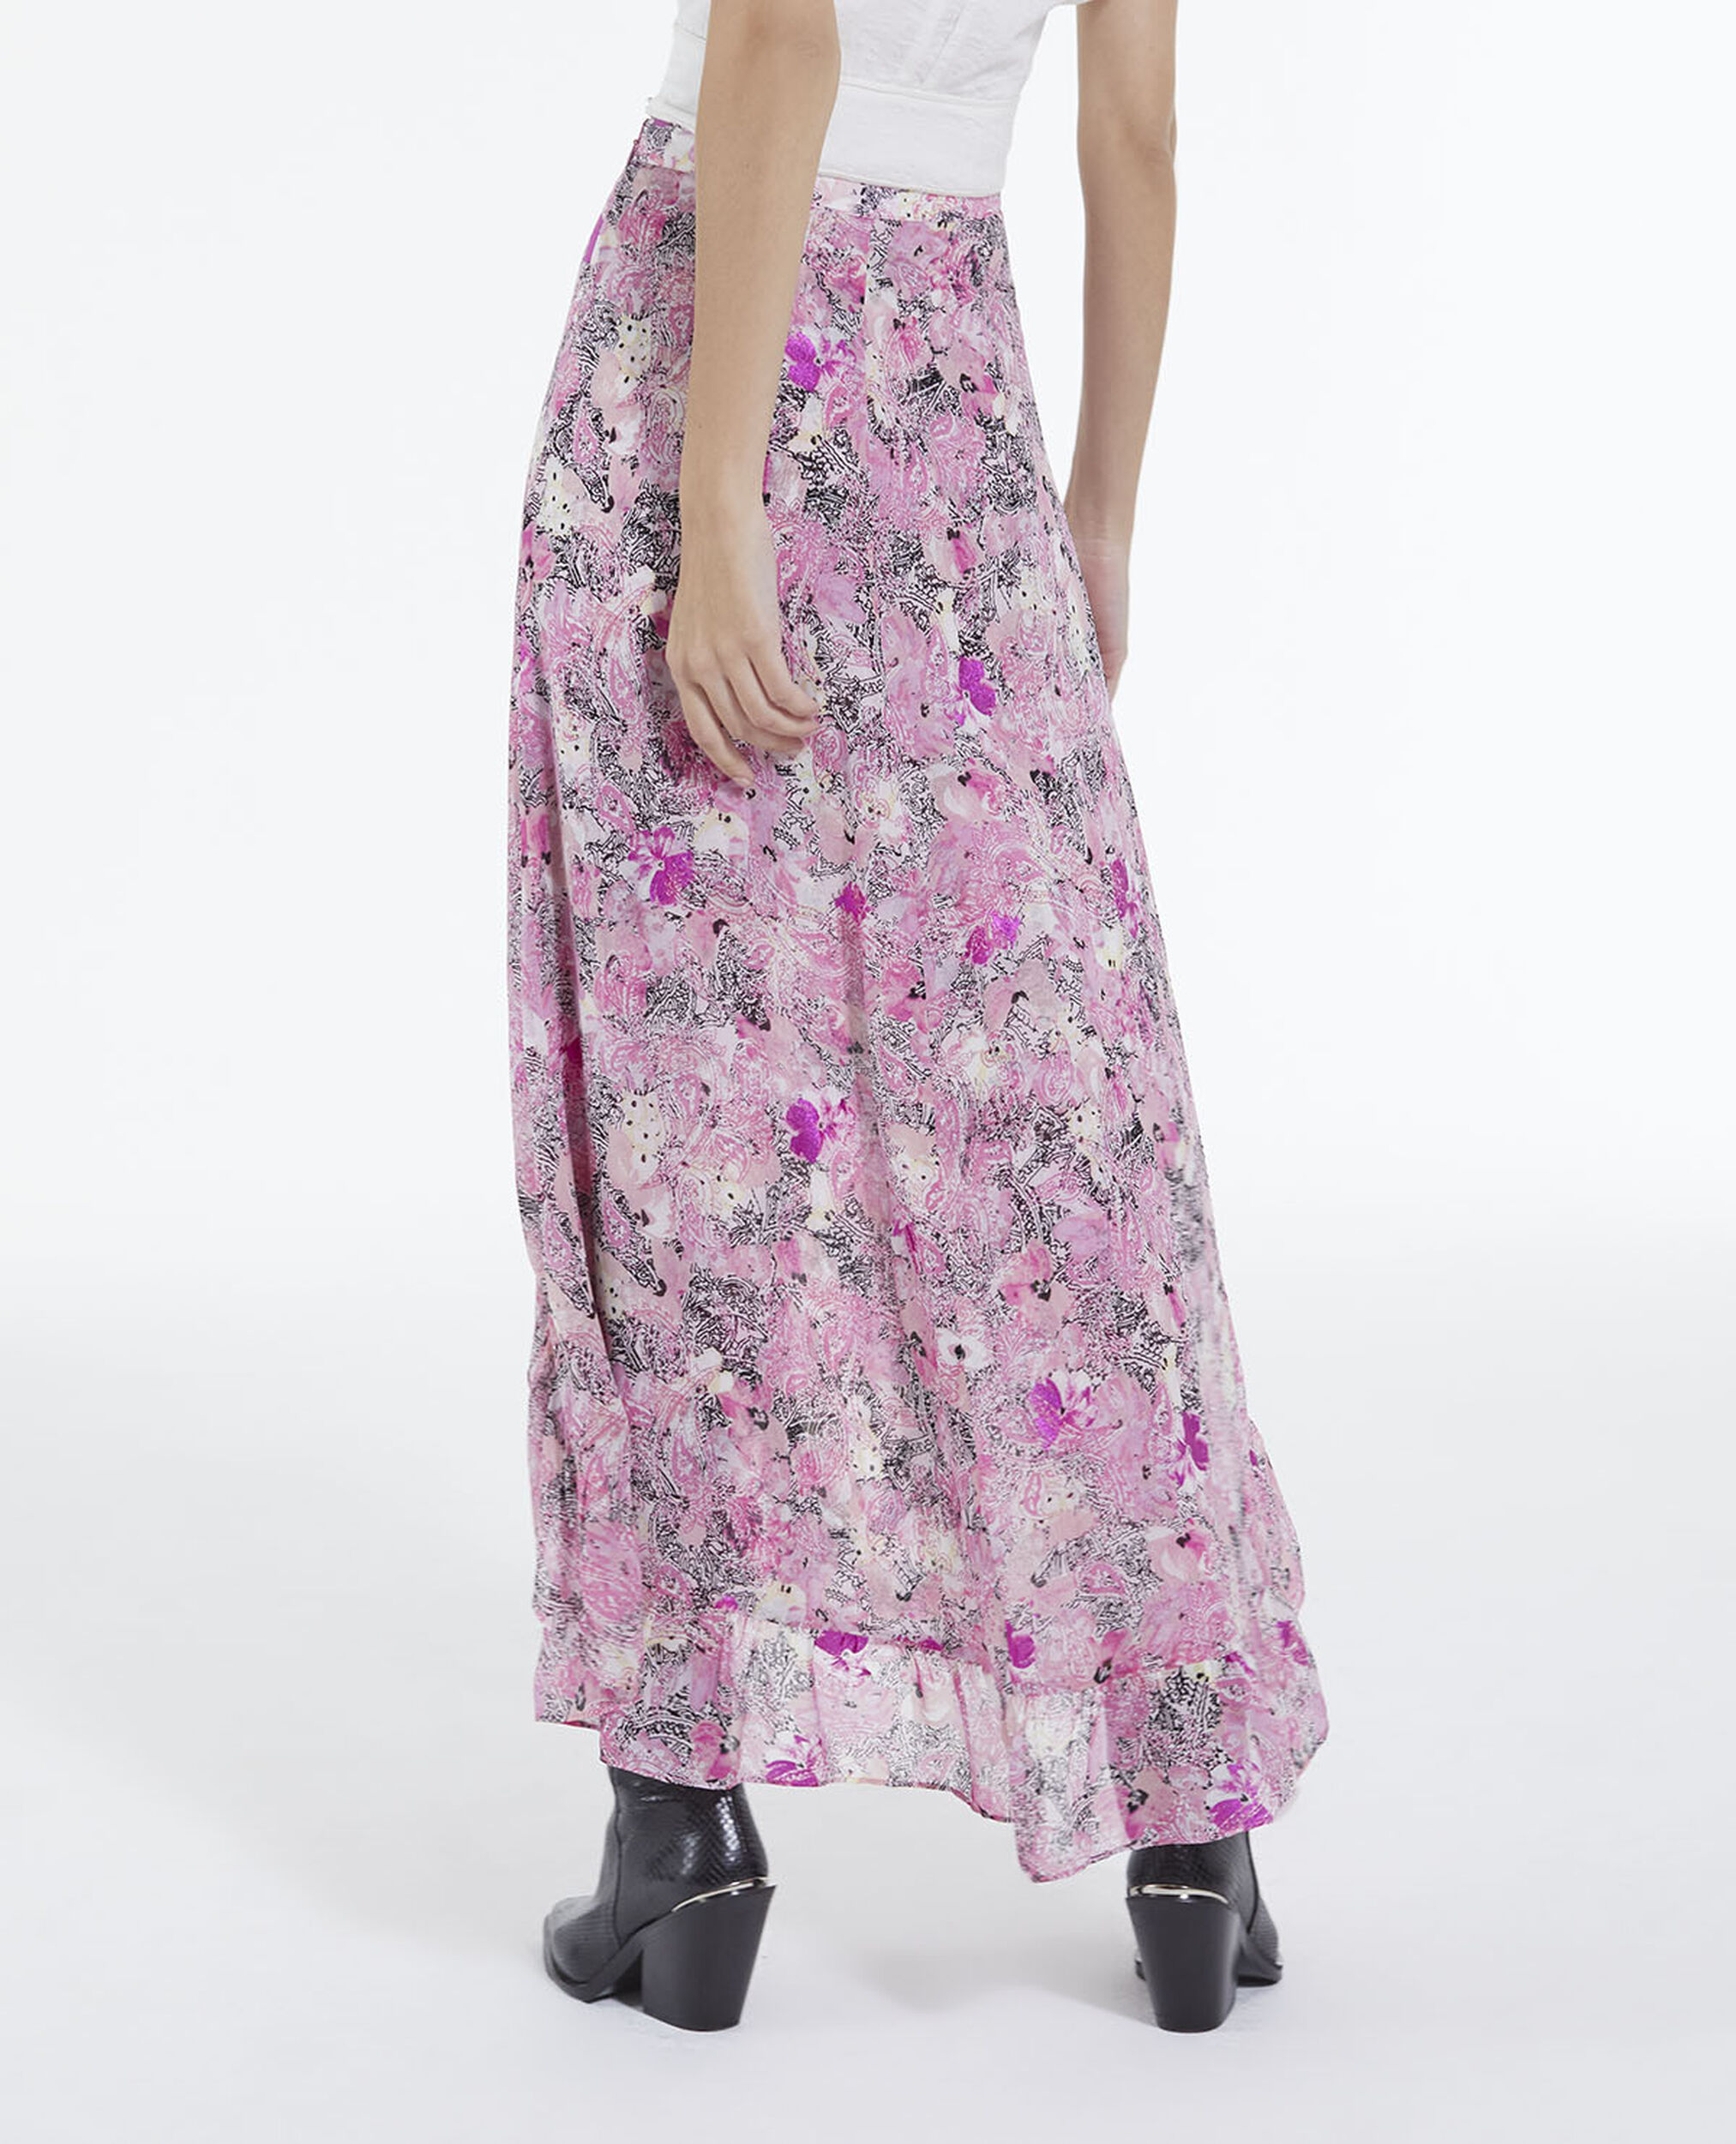 Flowing pink long skirt with floral print, PINK, hi-res image number null